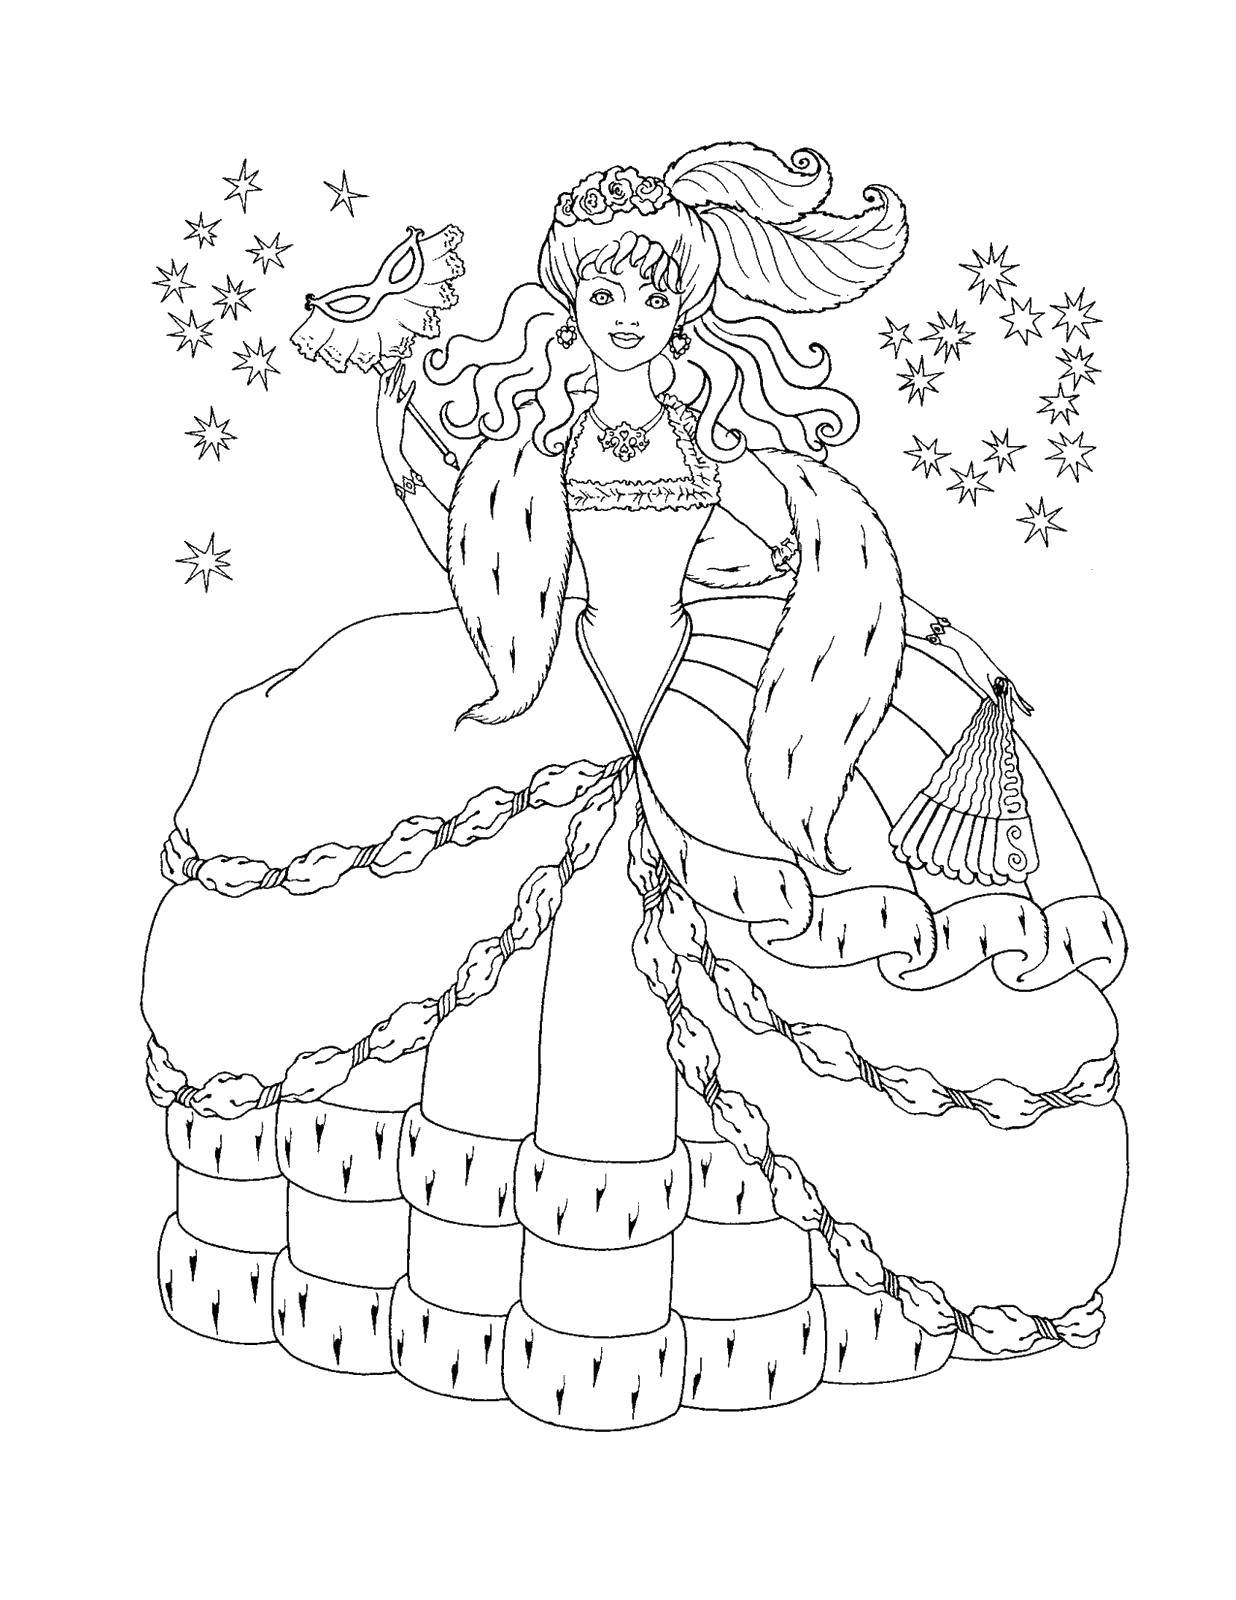 Coloring The Quinceanera dresses. Category Clothing. Tags:  Clothing, dress.